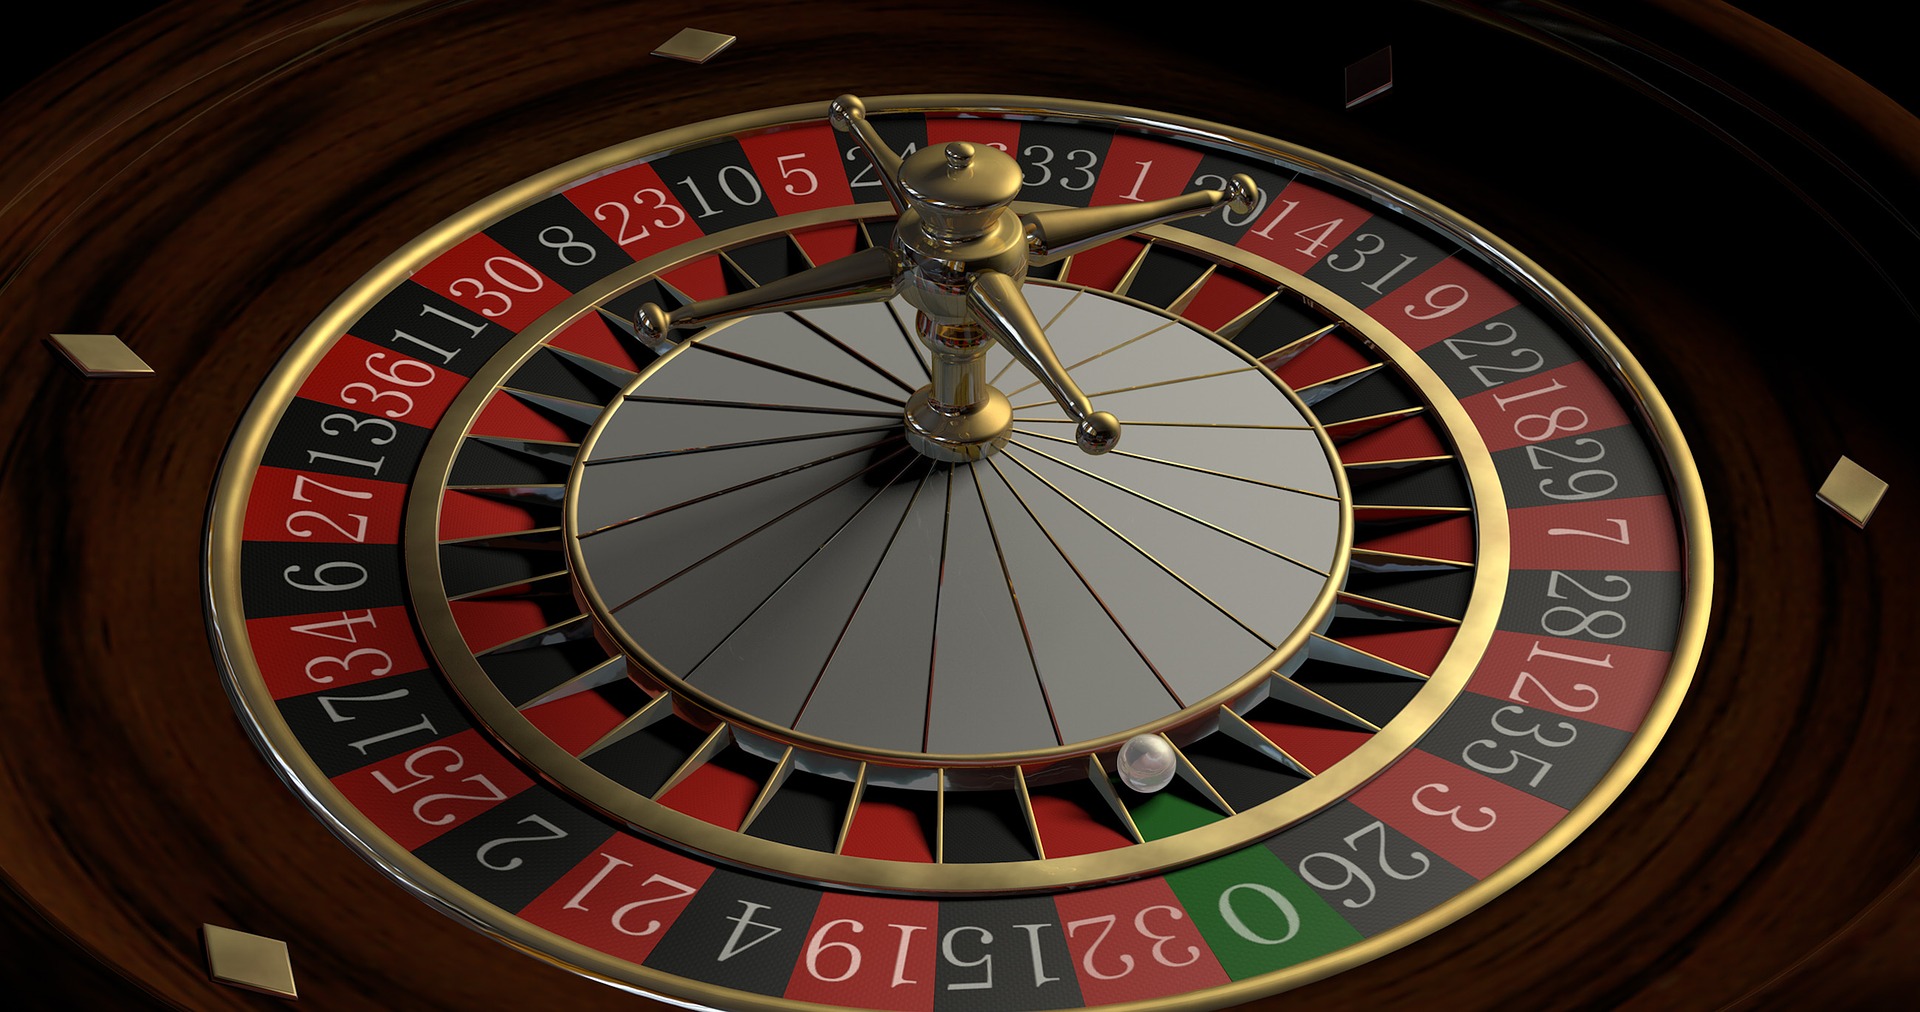 gambling-best-strategies-betting-roulette-online-live-casino-site-singapore